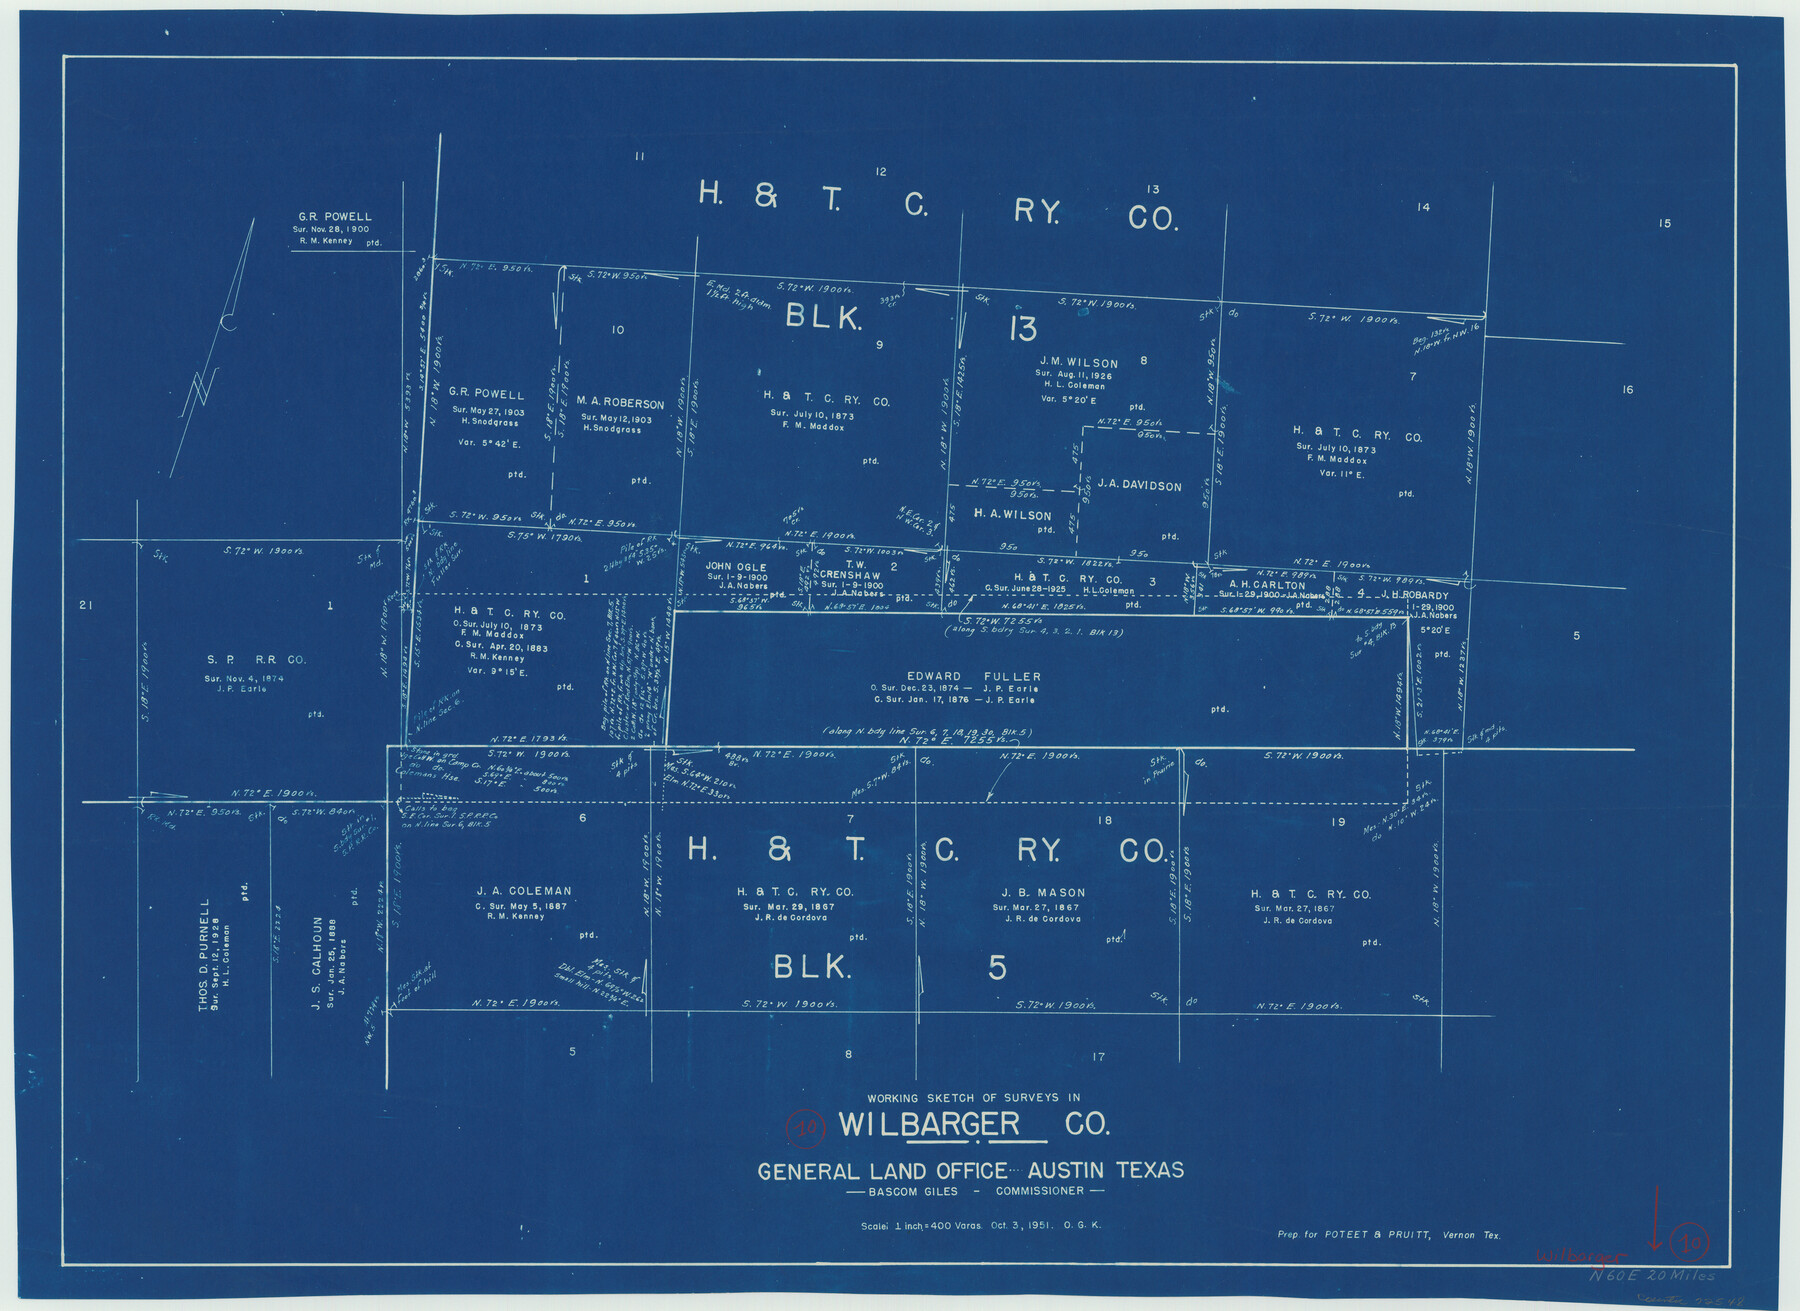 72548, Wilbarger County Working Sketch 10, General Map Collection